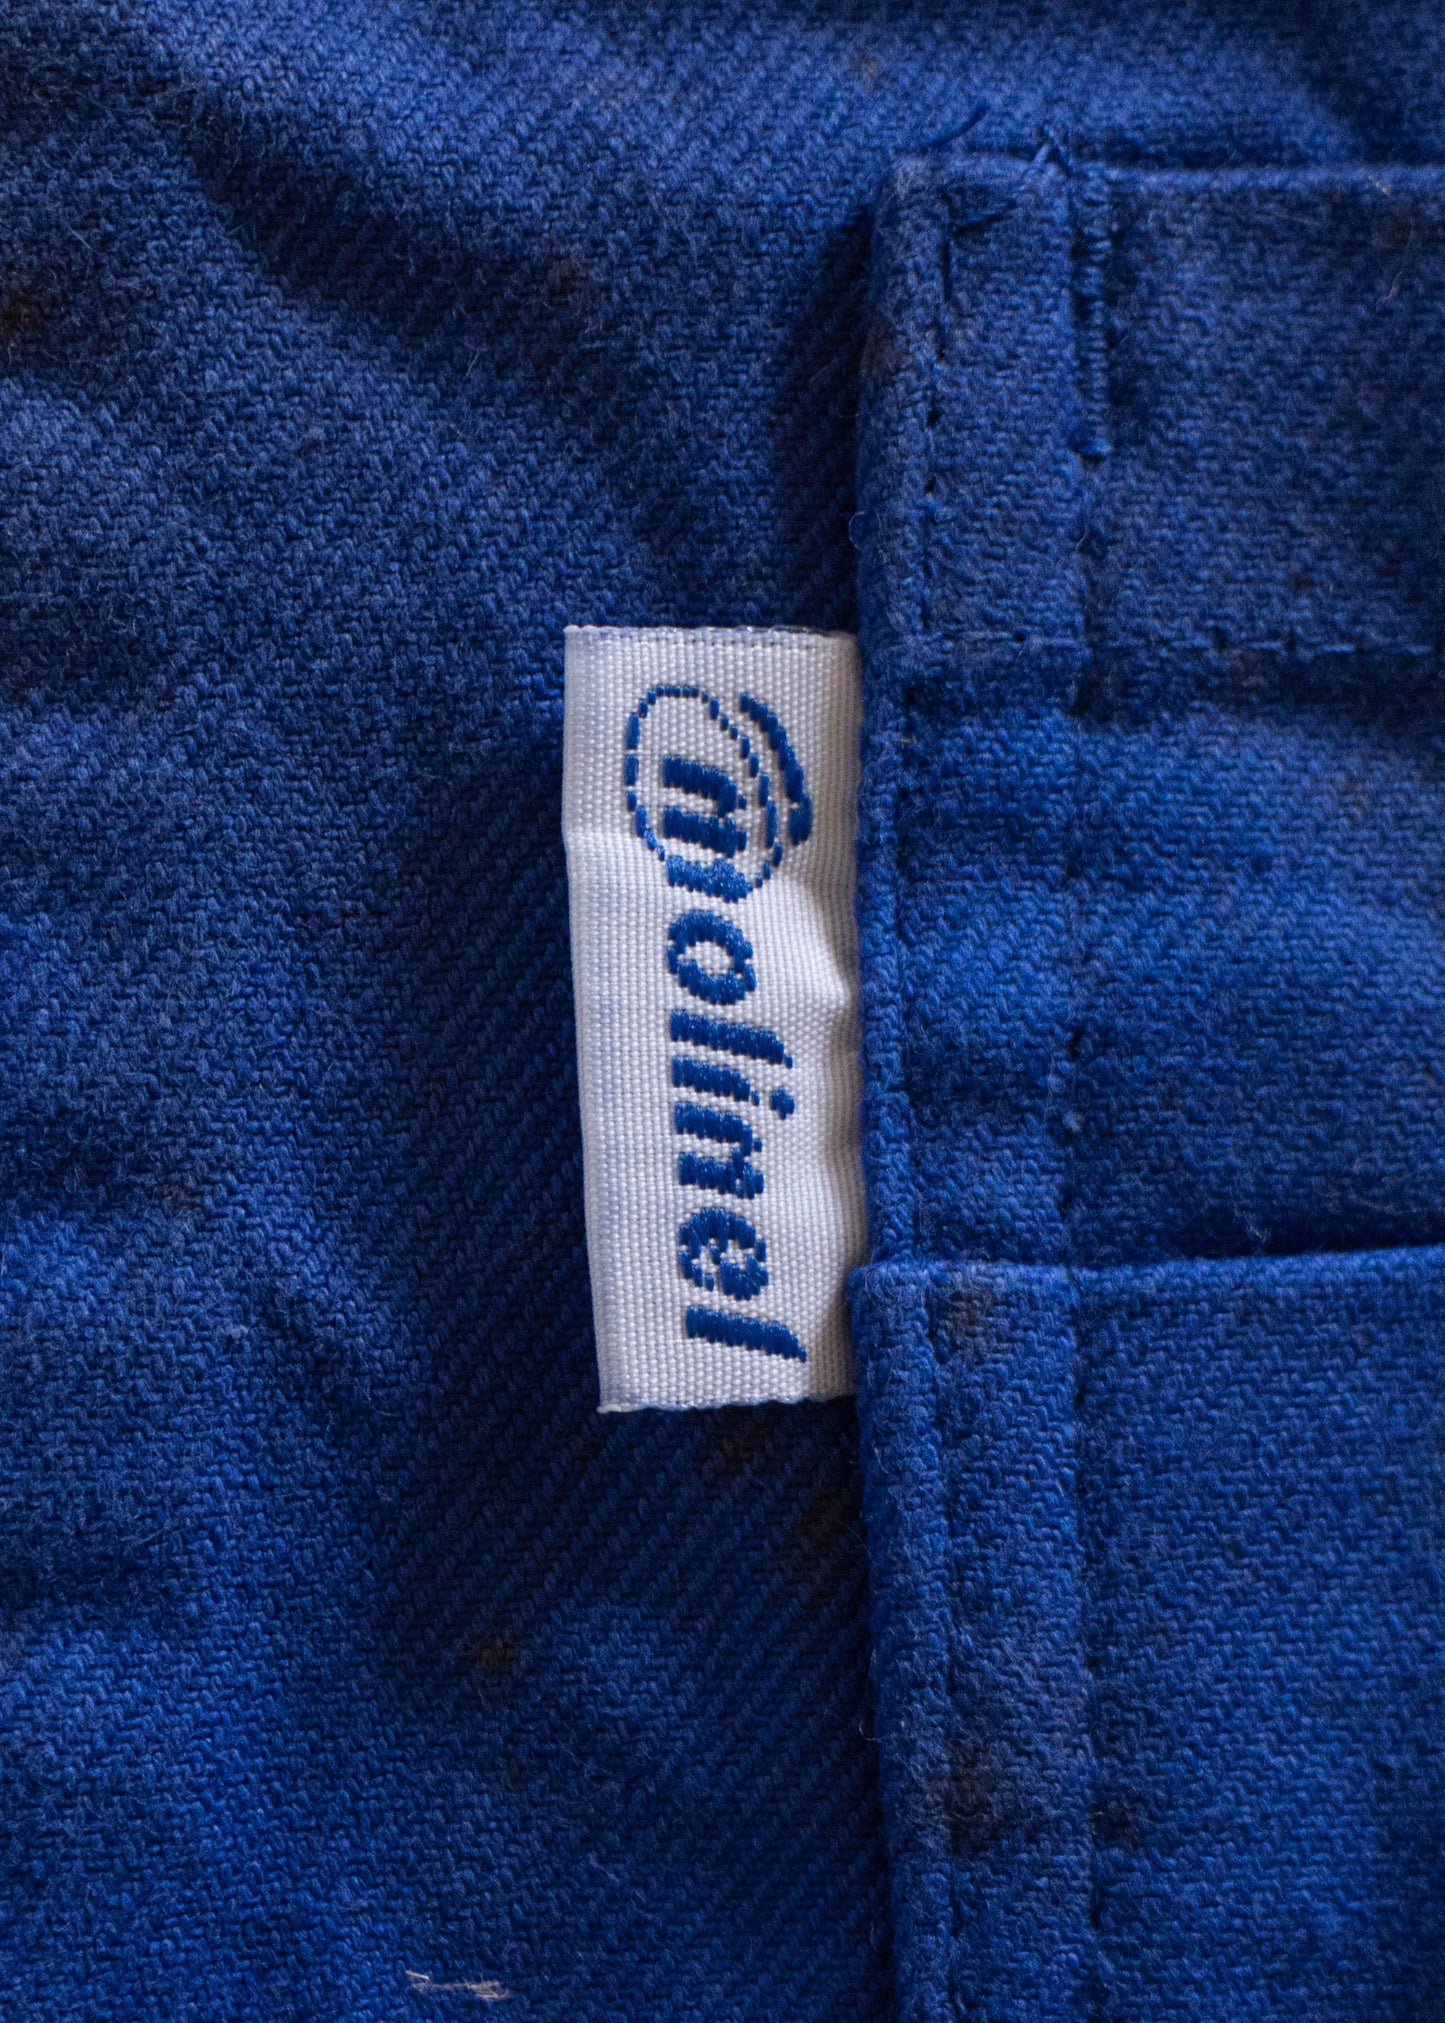 1980s Molinel French Workwear Button Up Chore Jacket Size L/XL